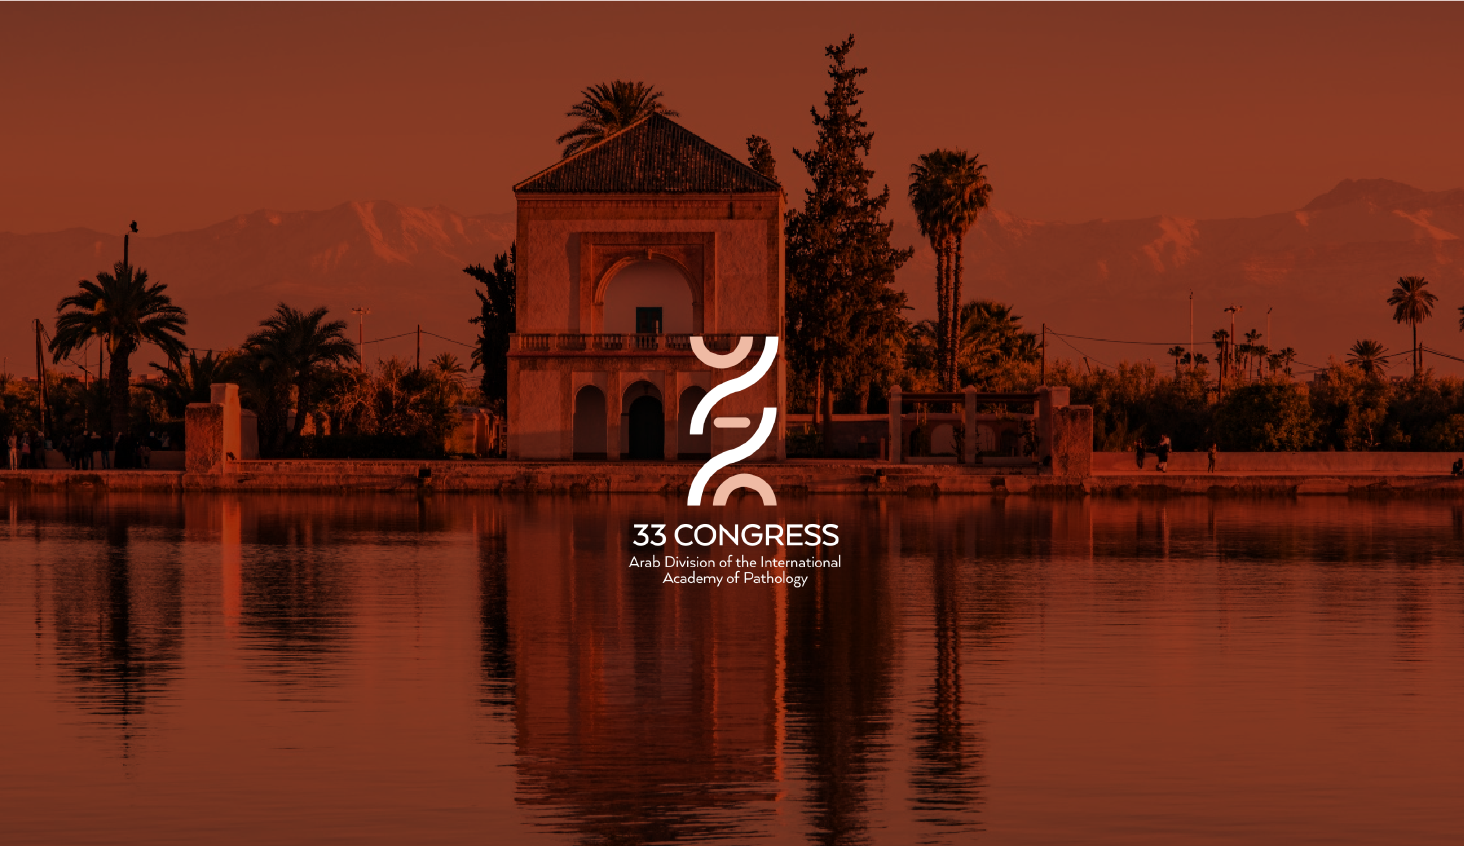 33rd Congress of the Arab Division of the International Academy of Pathology